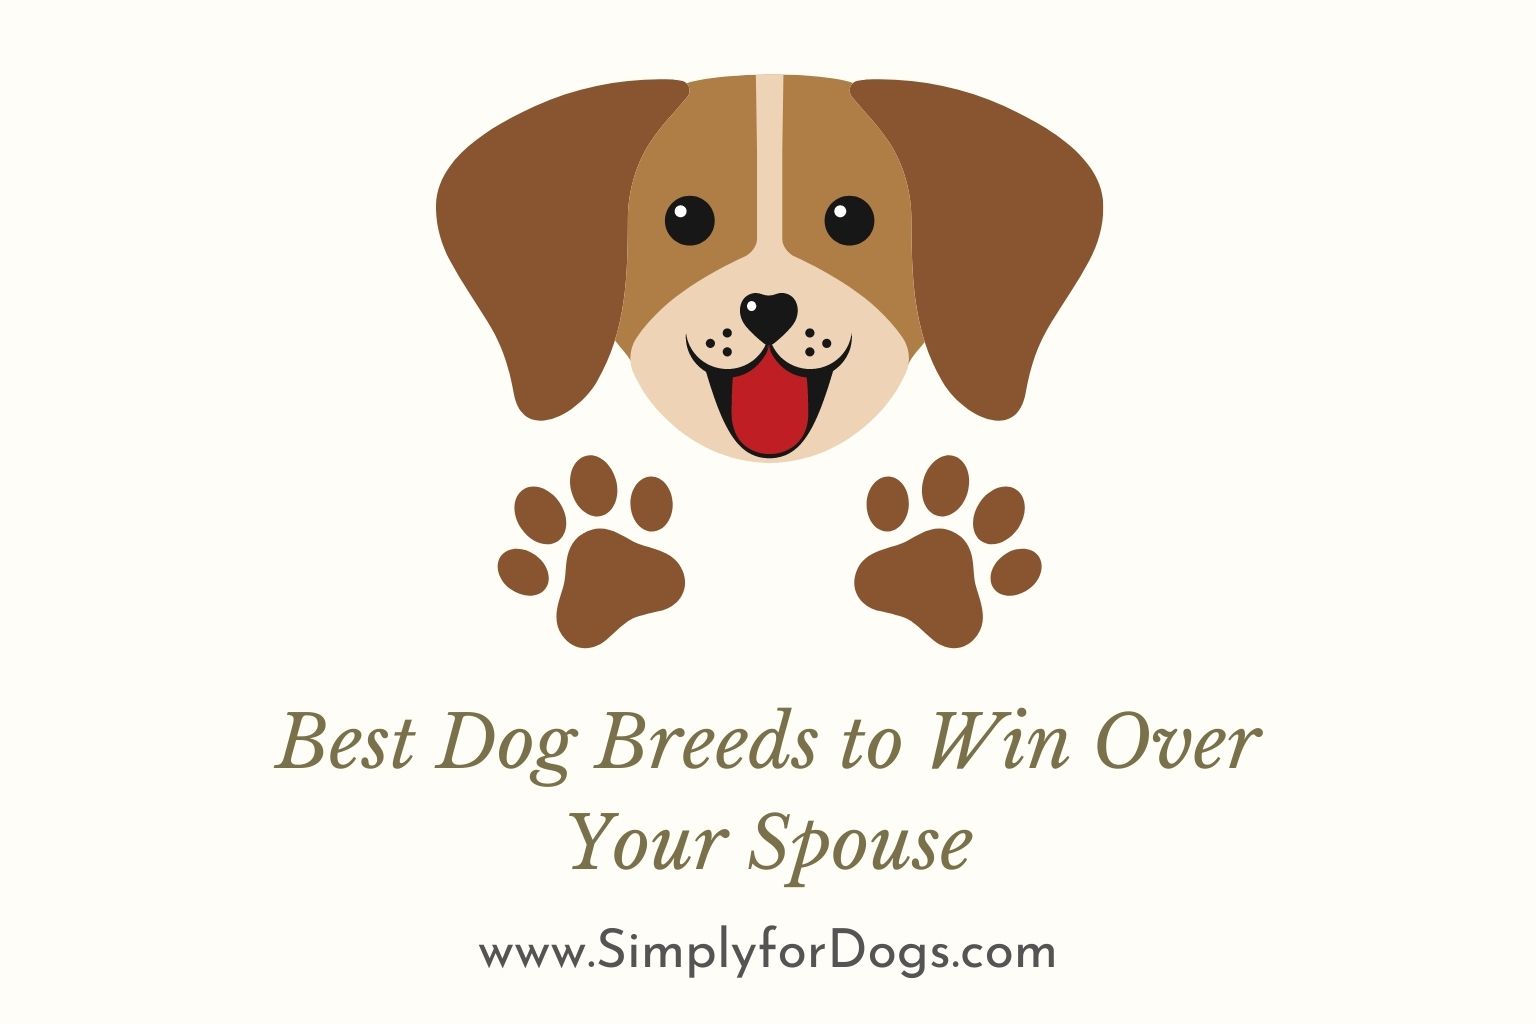 Best Dog Breeds to Win Over Your Spouse